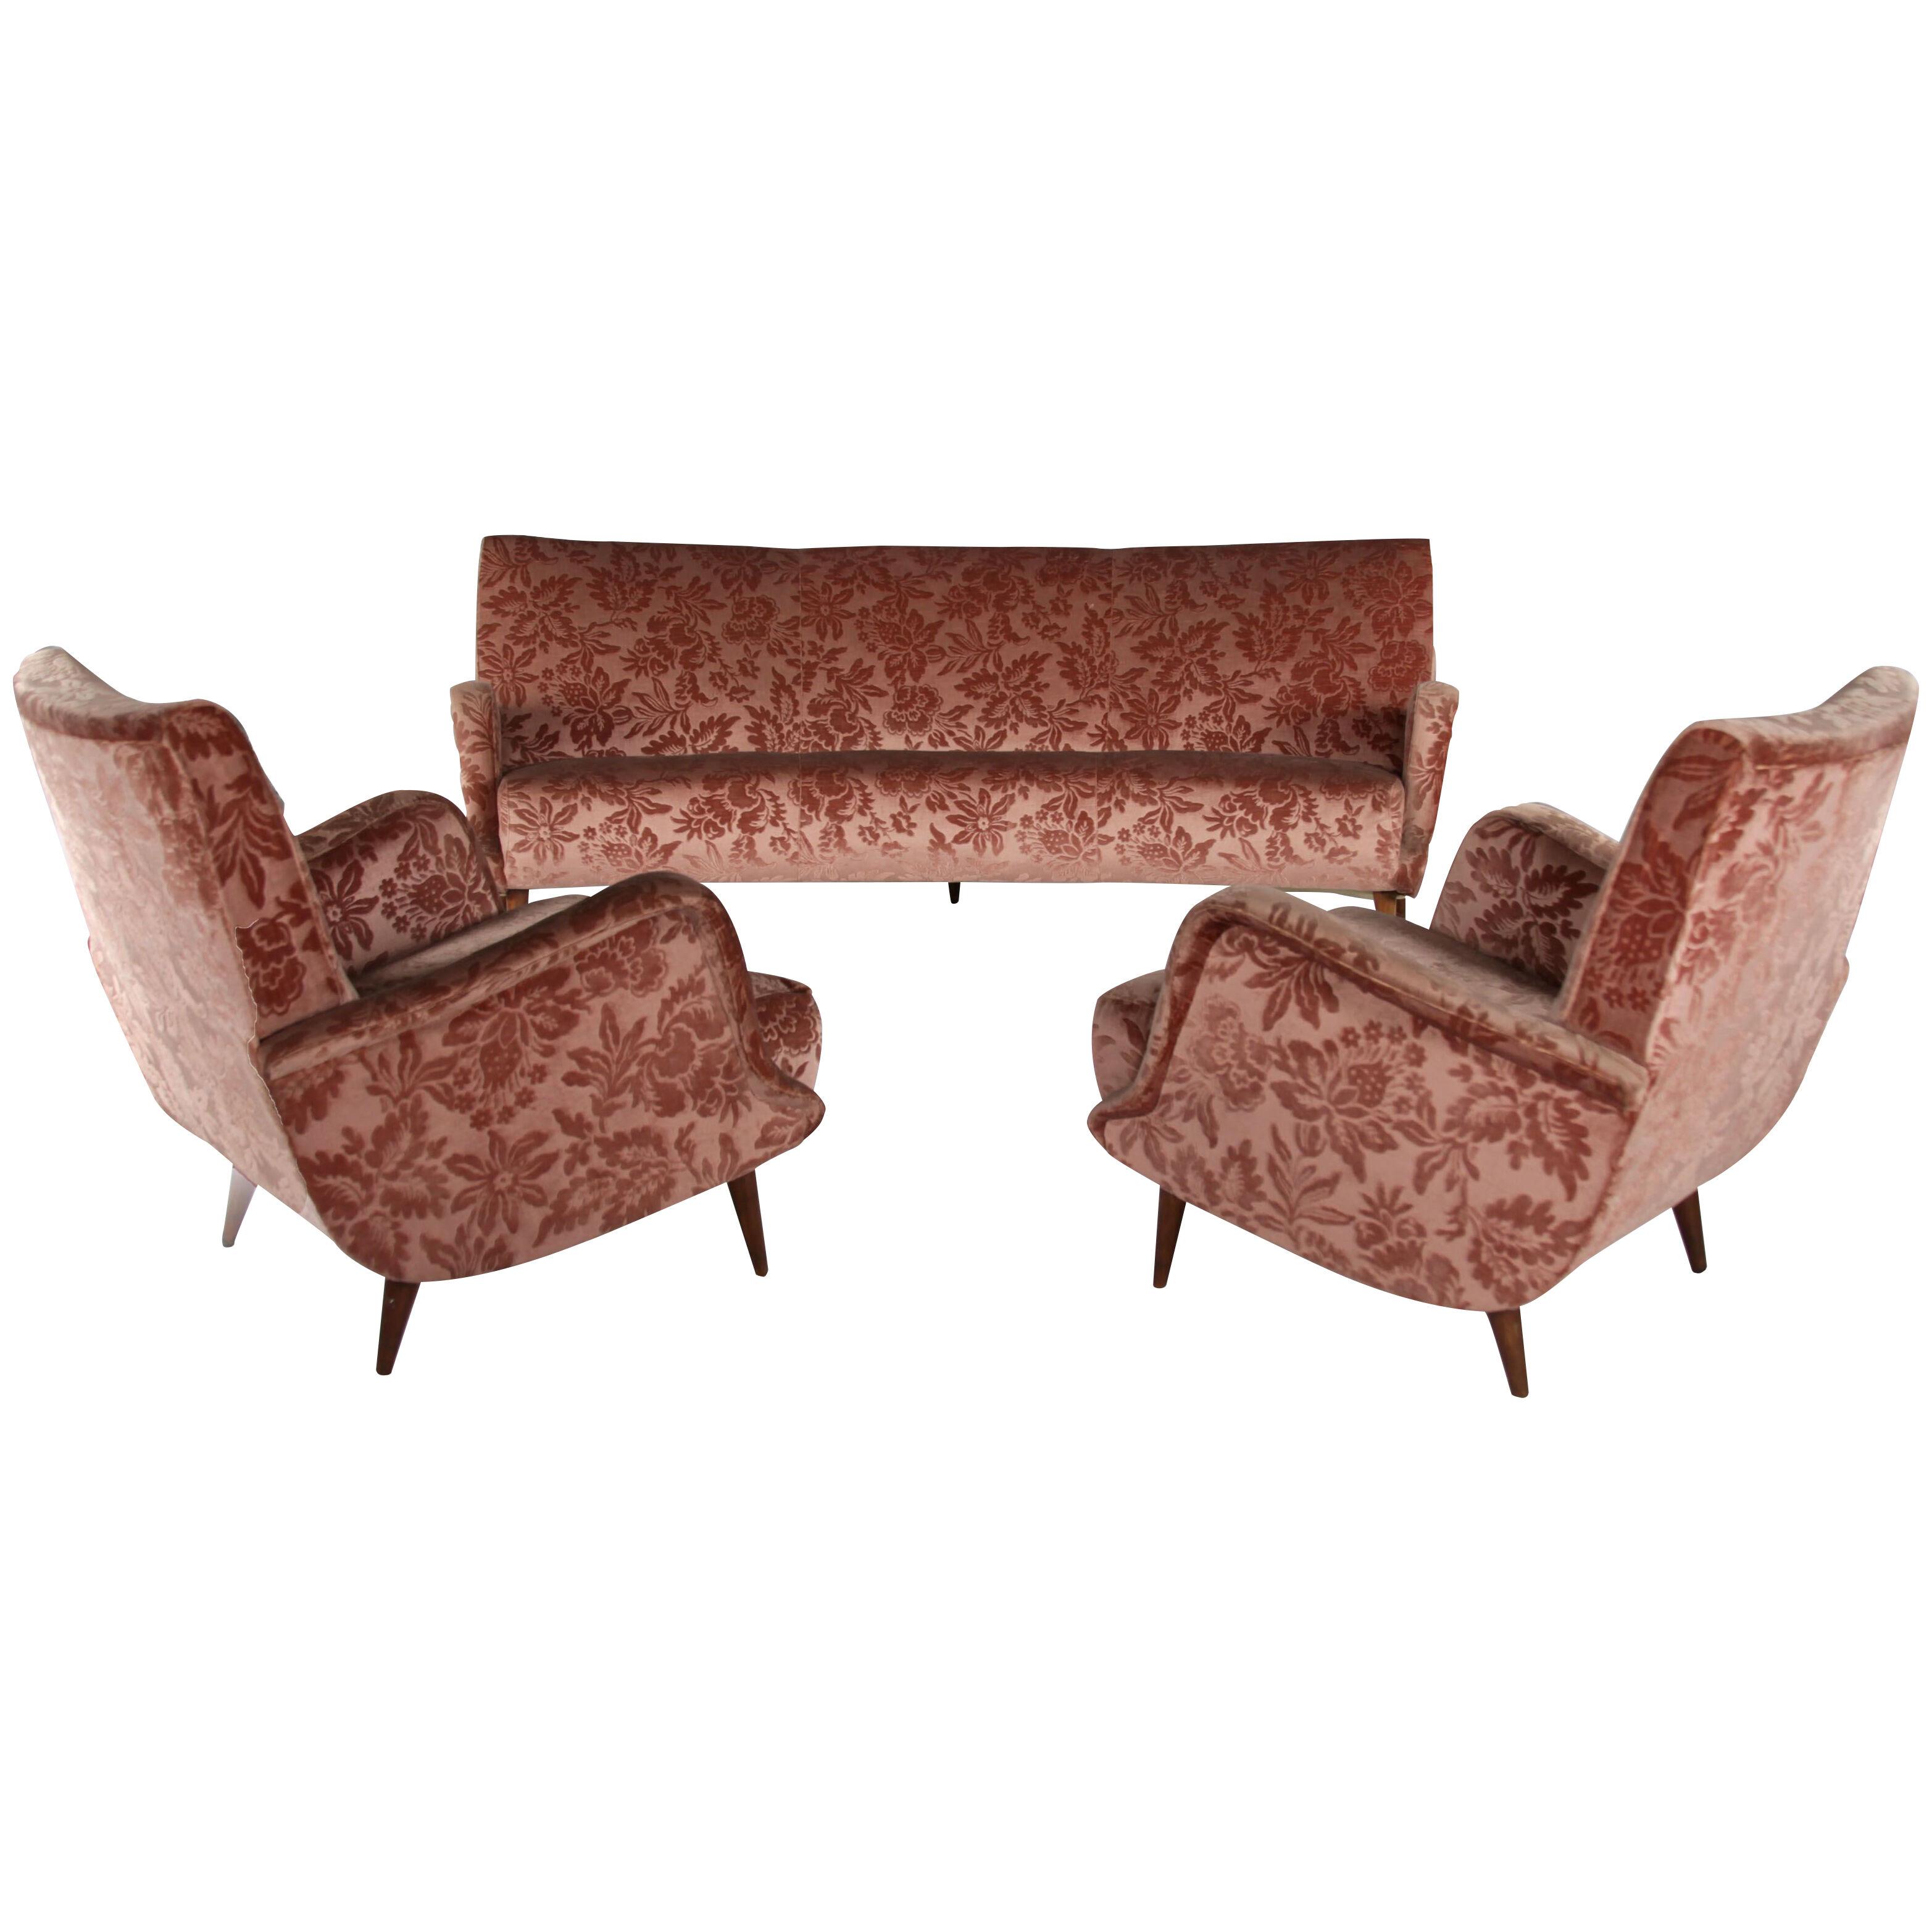 Set of 2 Armchairs and 1 Sofa from "806" Series, by Carlo de Carli, Cassina